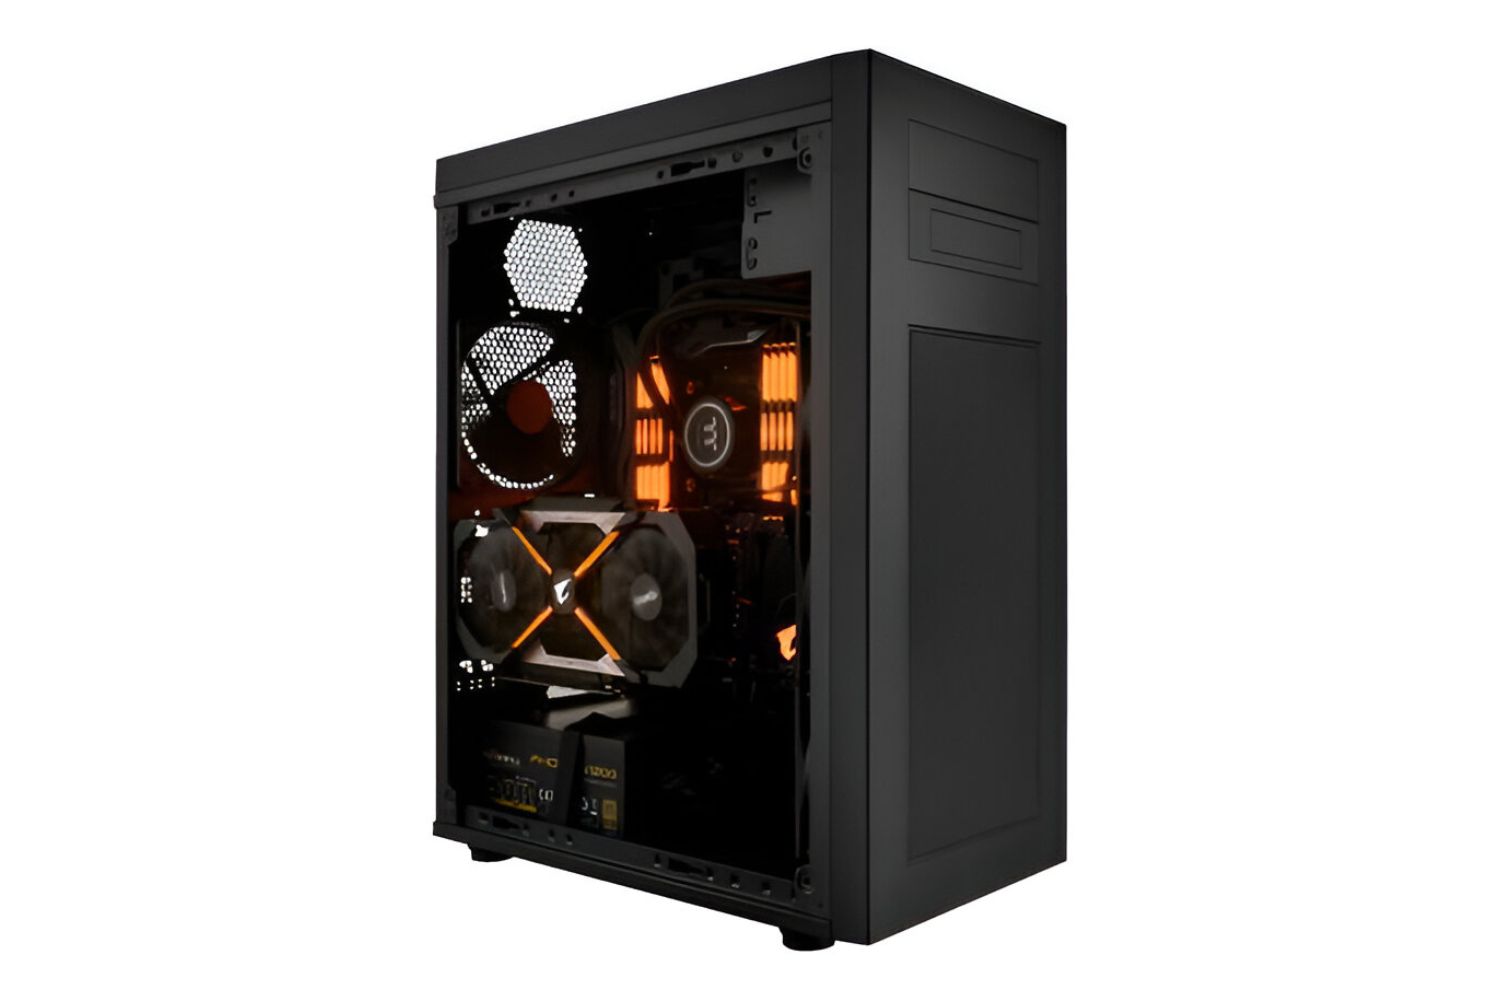 What Is The Tallest CPU Cooler I Can Fit In A Rosewill Rise Glow